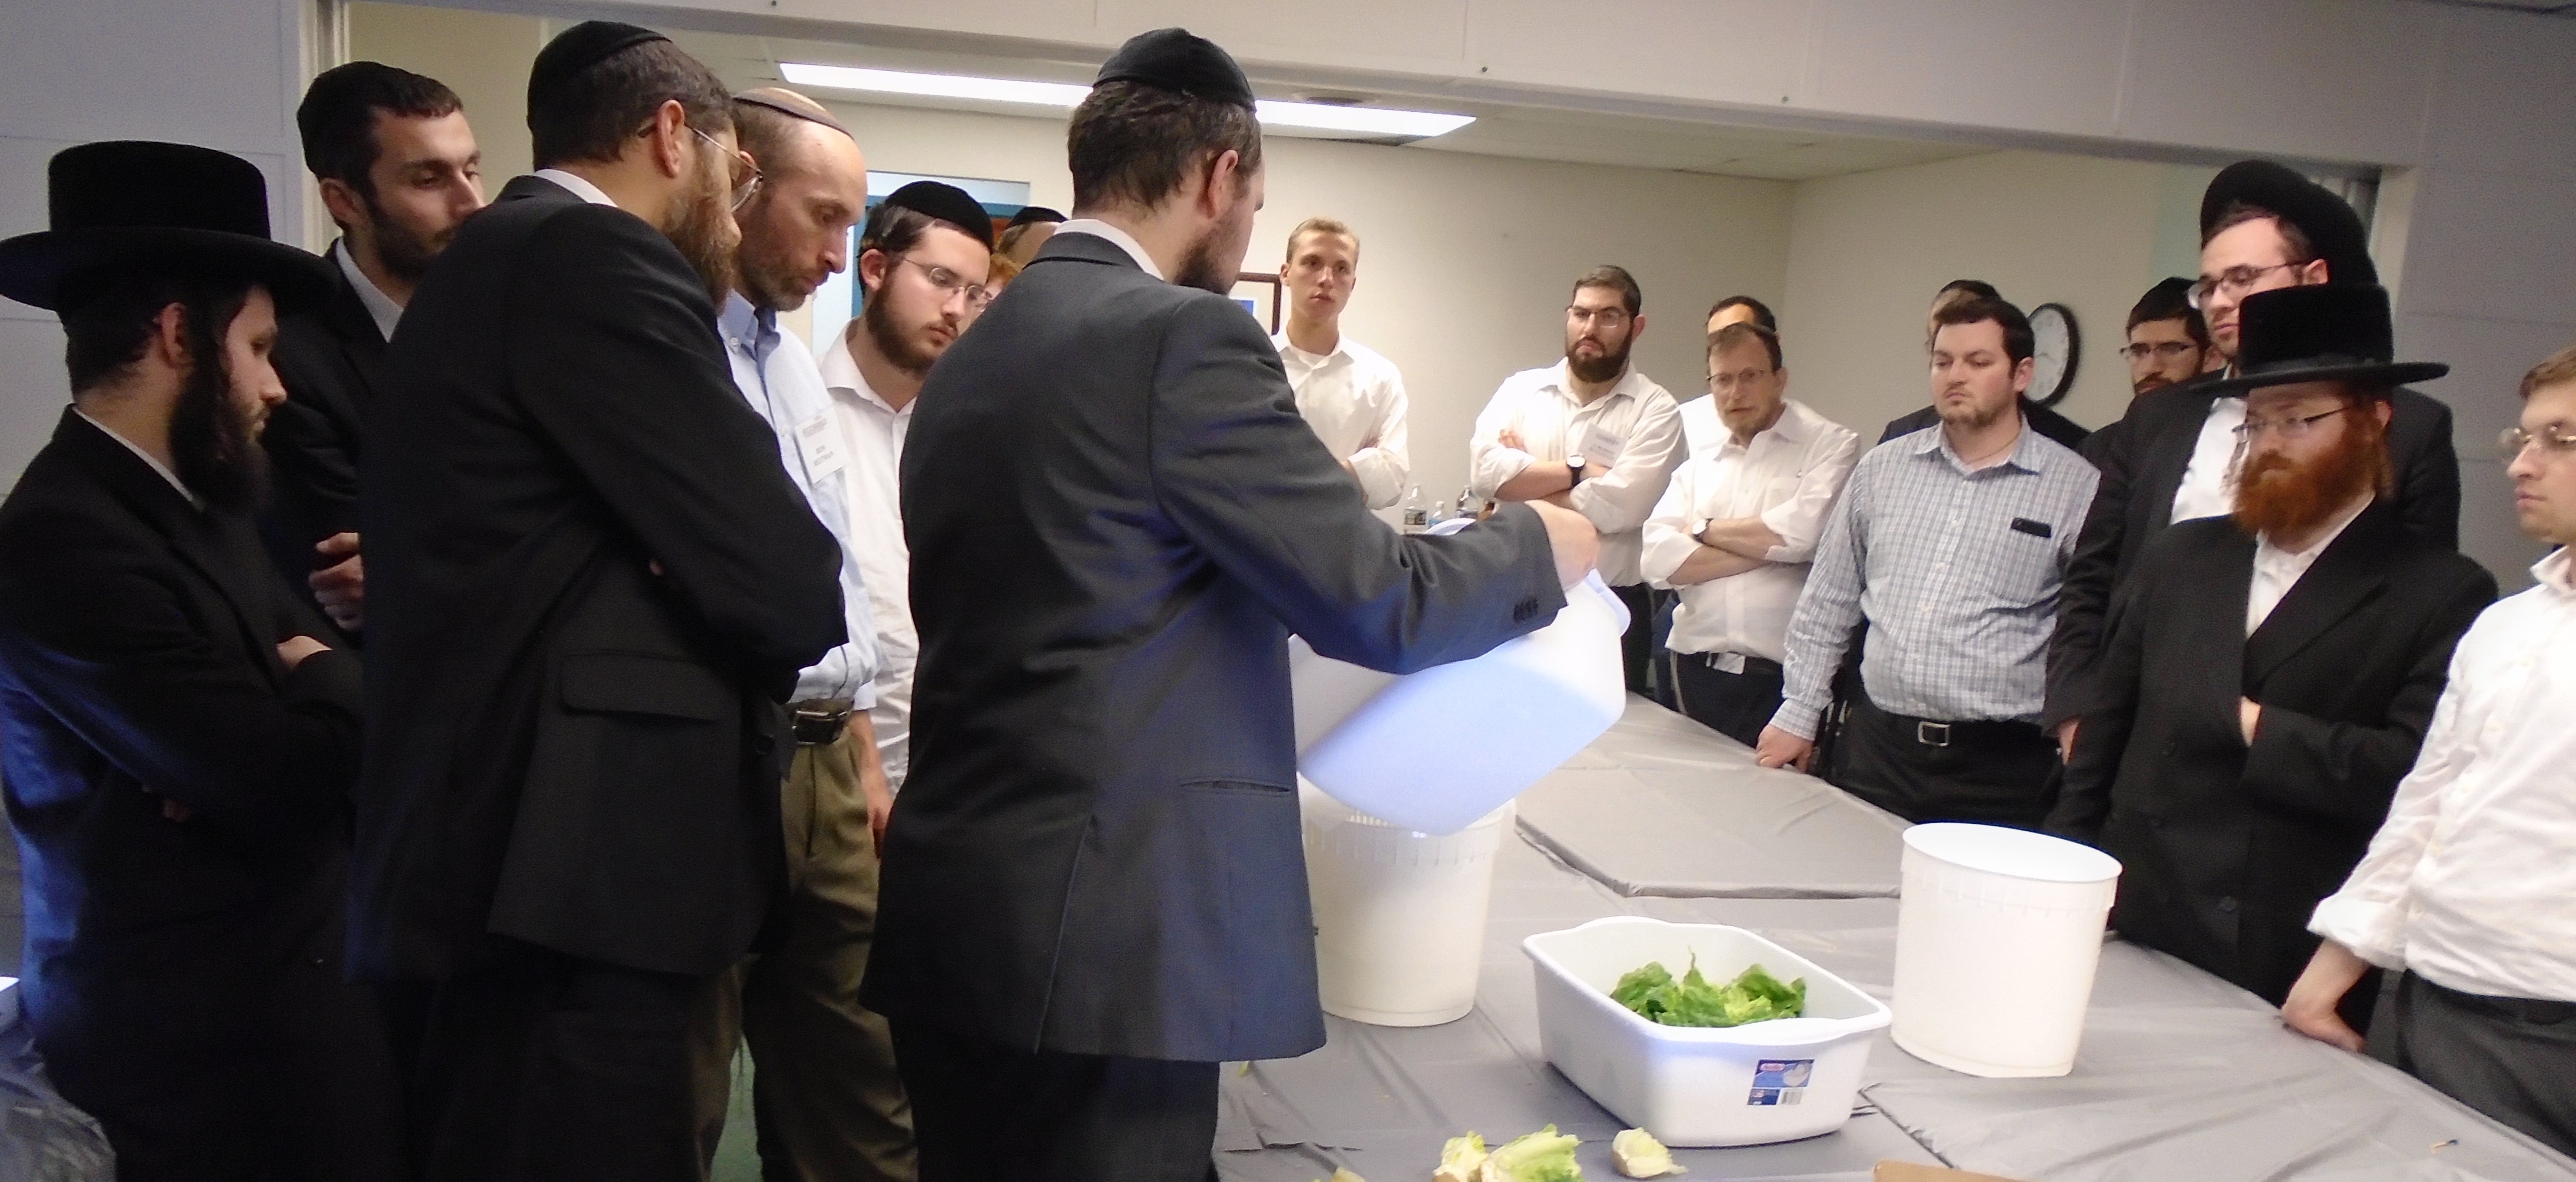 STAR-K FOOD SERVICE KASHRUS TRAINING SEMINAR IS WORTH THE TRIP…EVEN FROM ISRAEL AND COSTA RICA